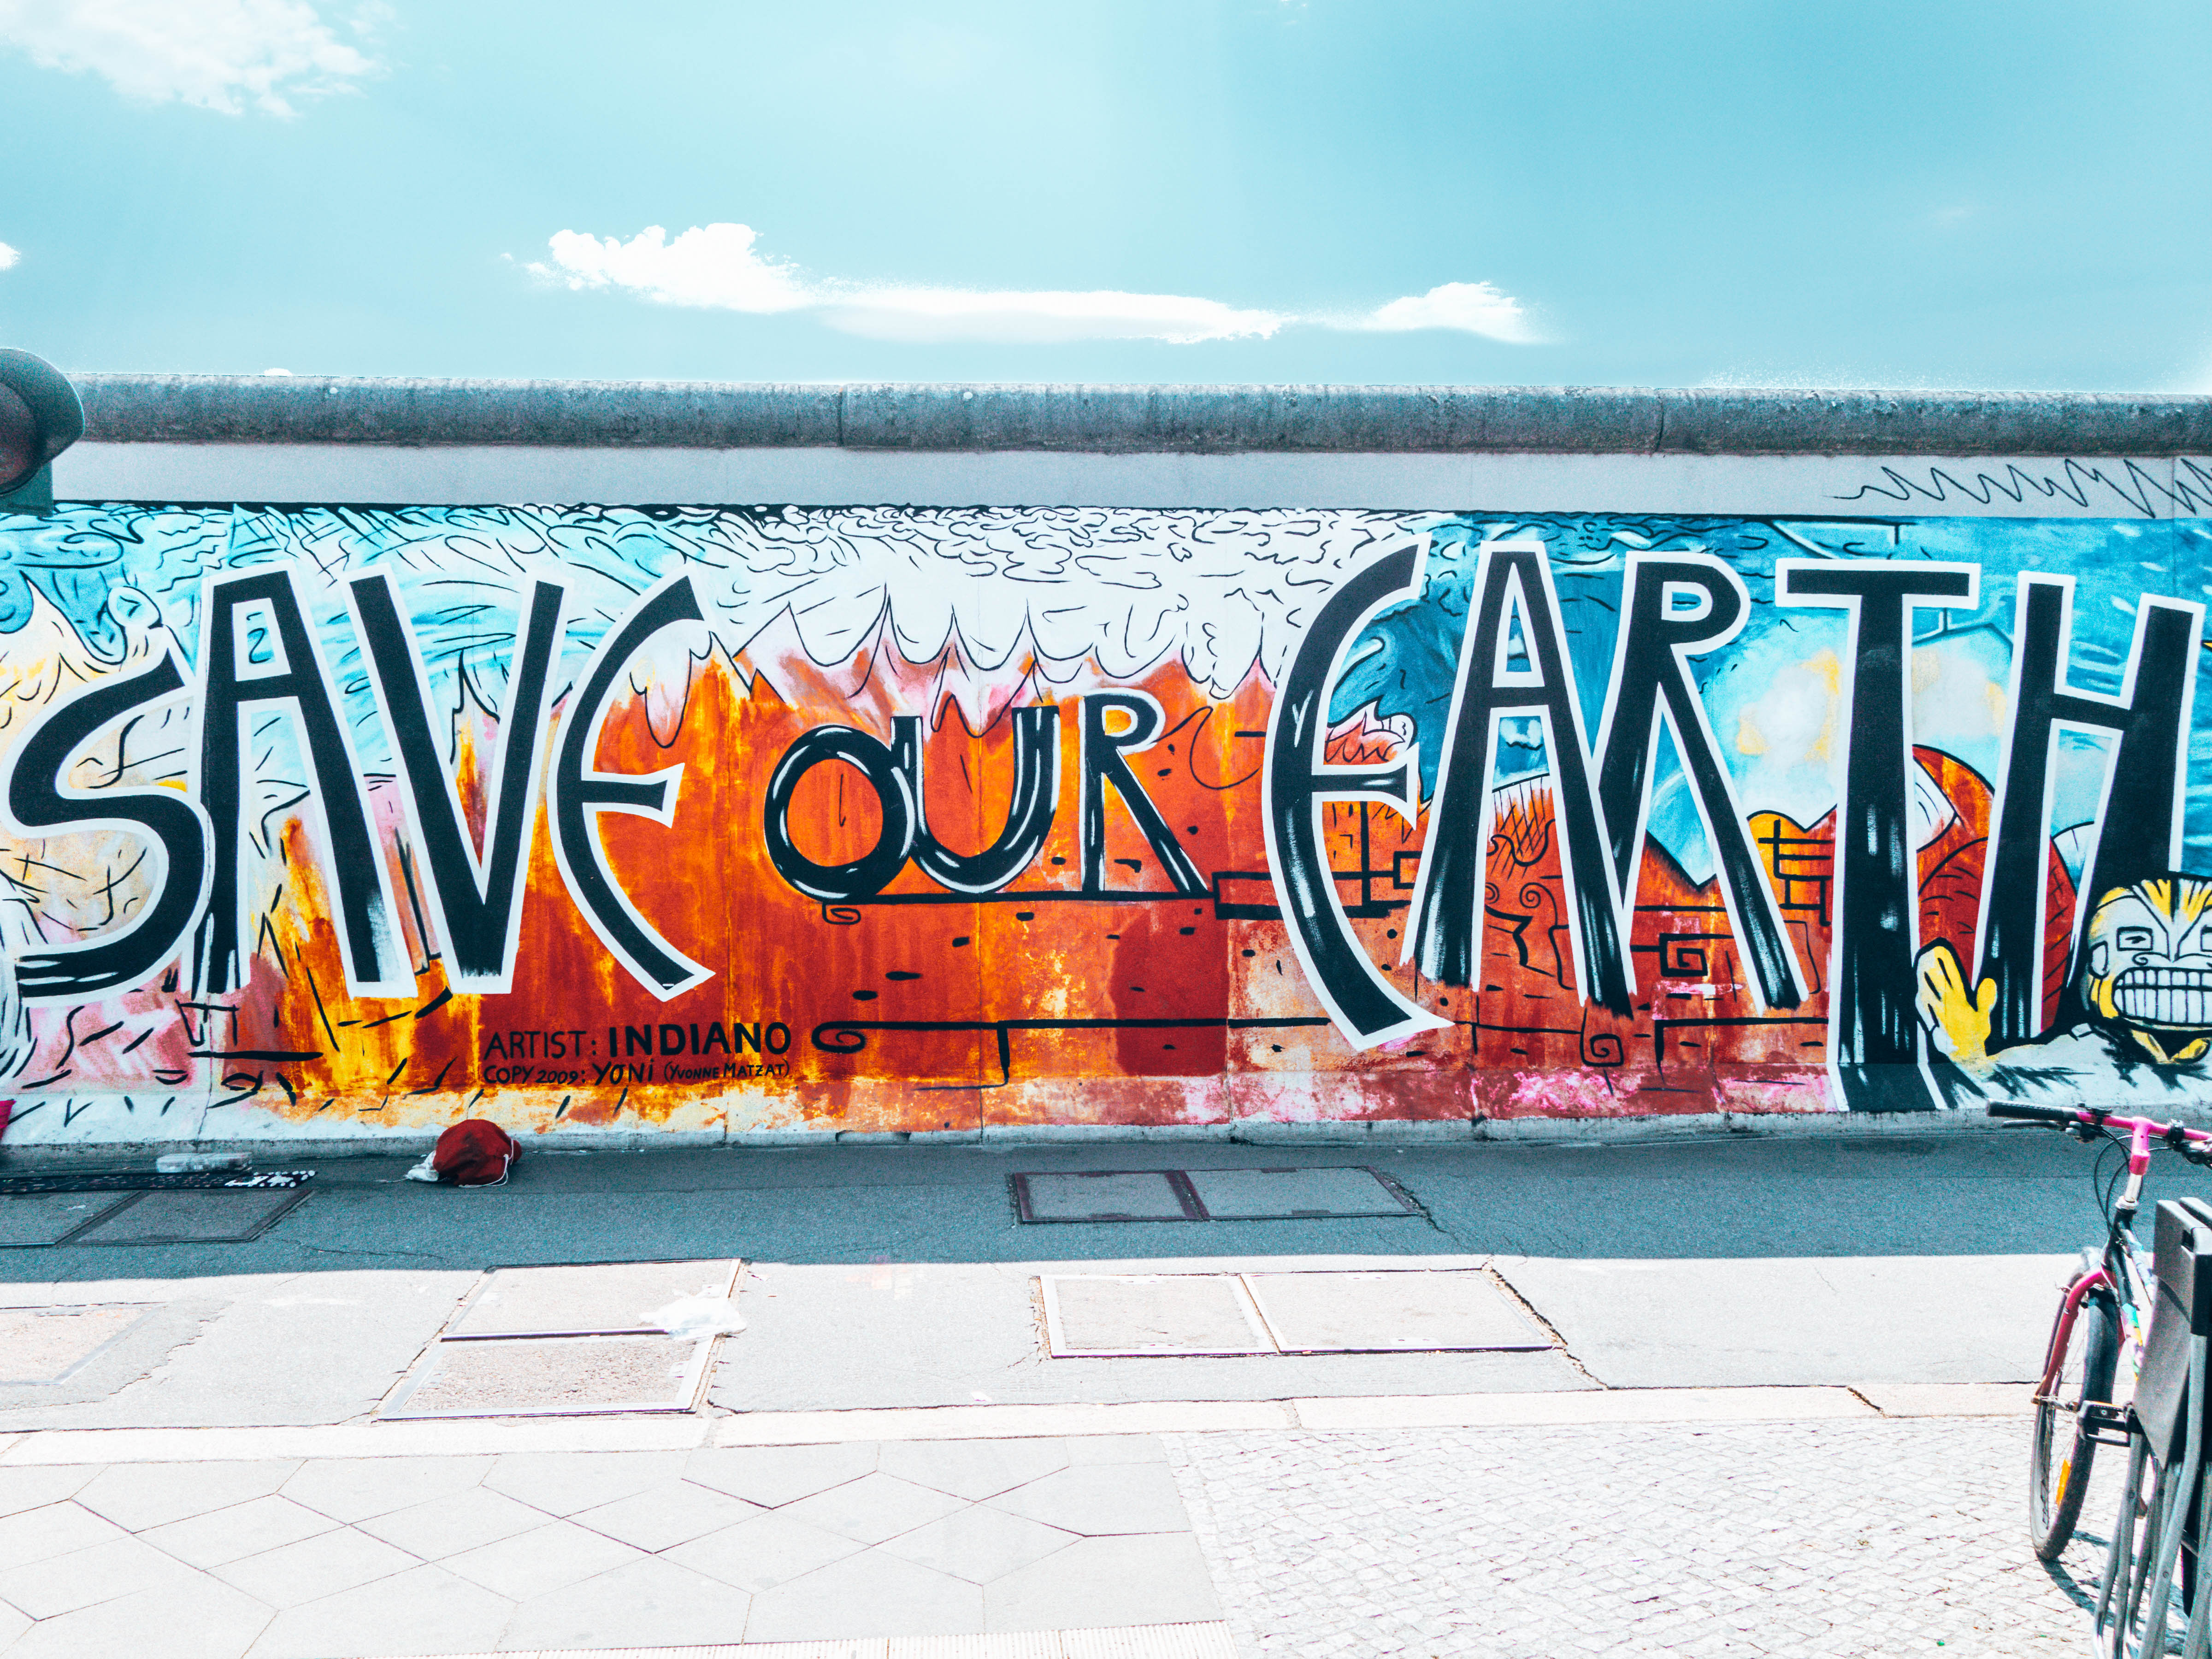 Save our Earth, Part of the East Side Gallery, street art museum in Berlin